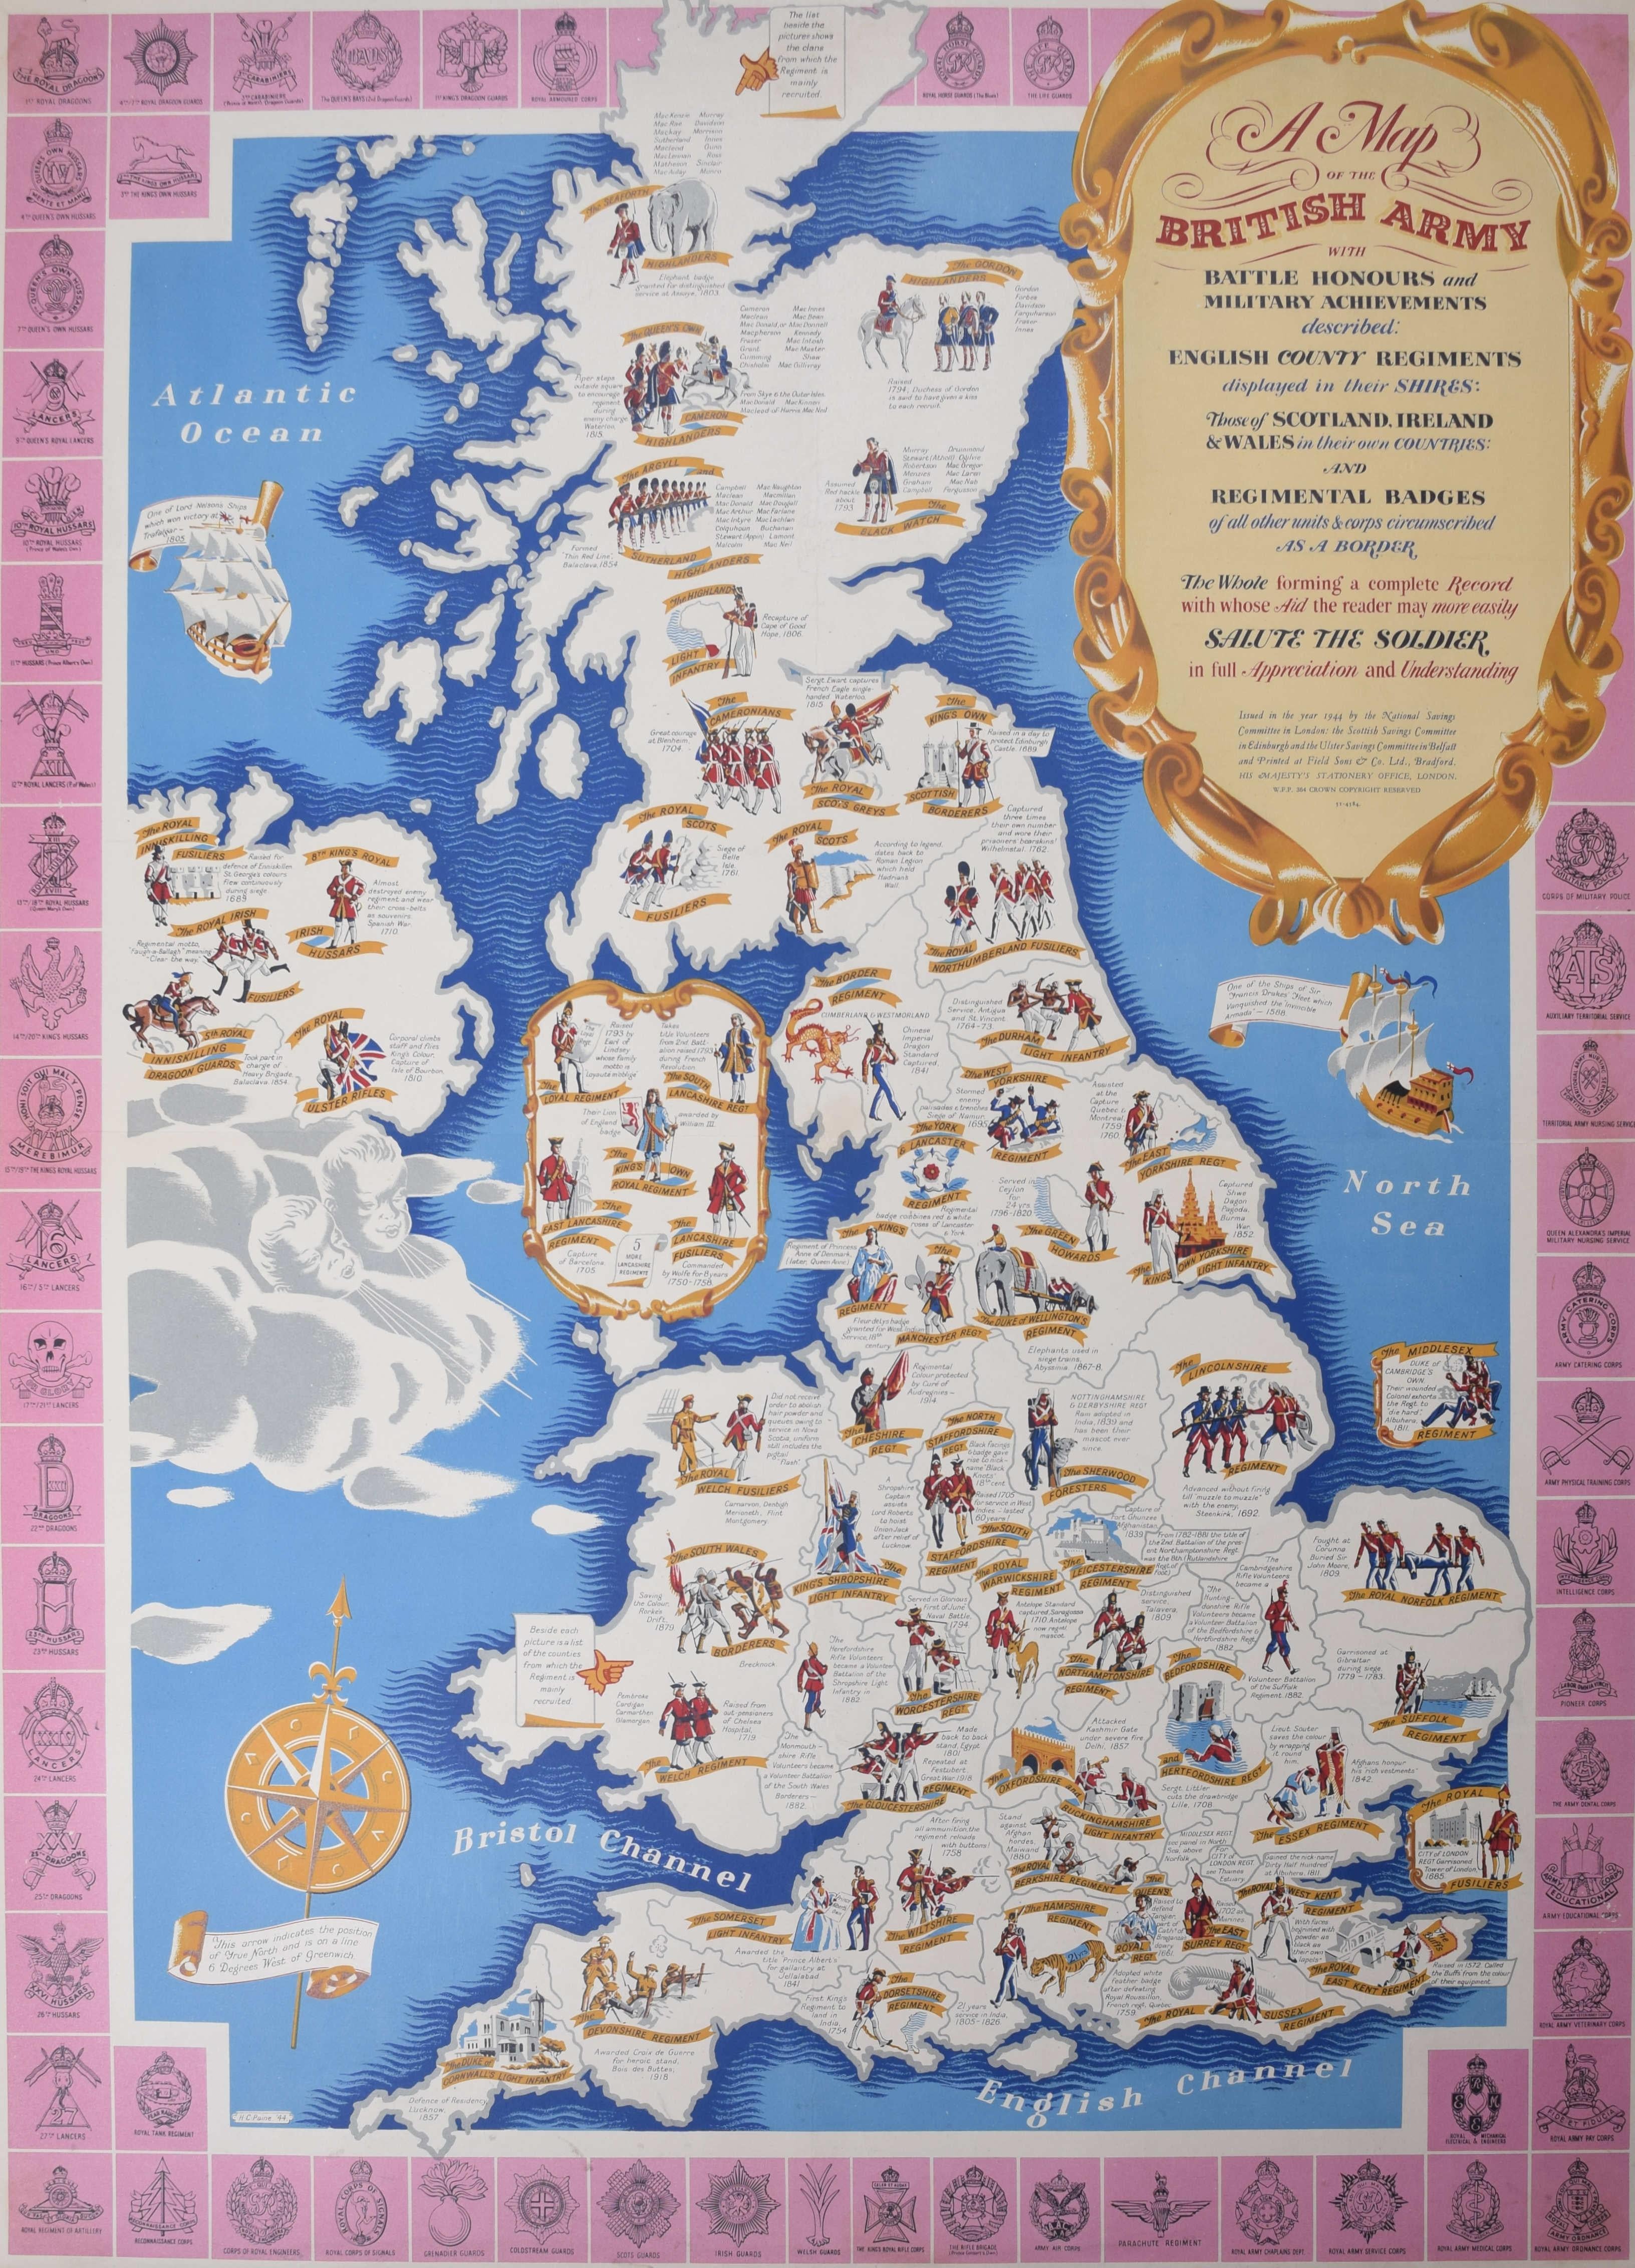 1944 WW2 British Army map poster by Charles Paine for National Savings